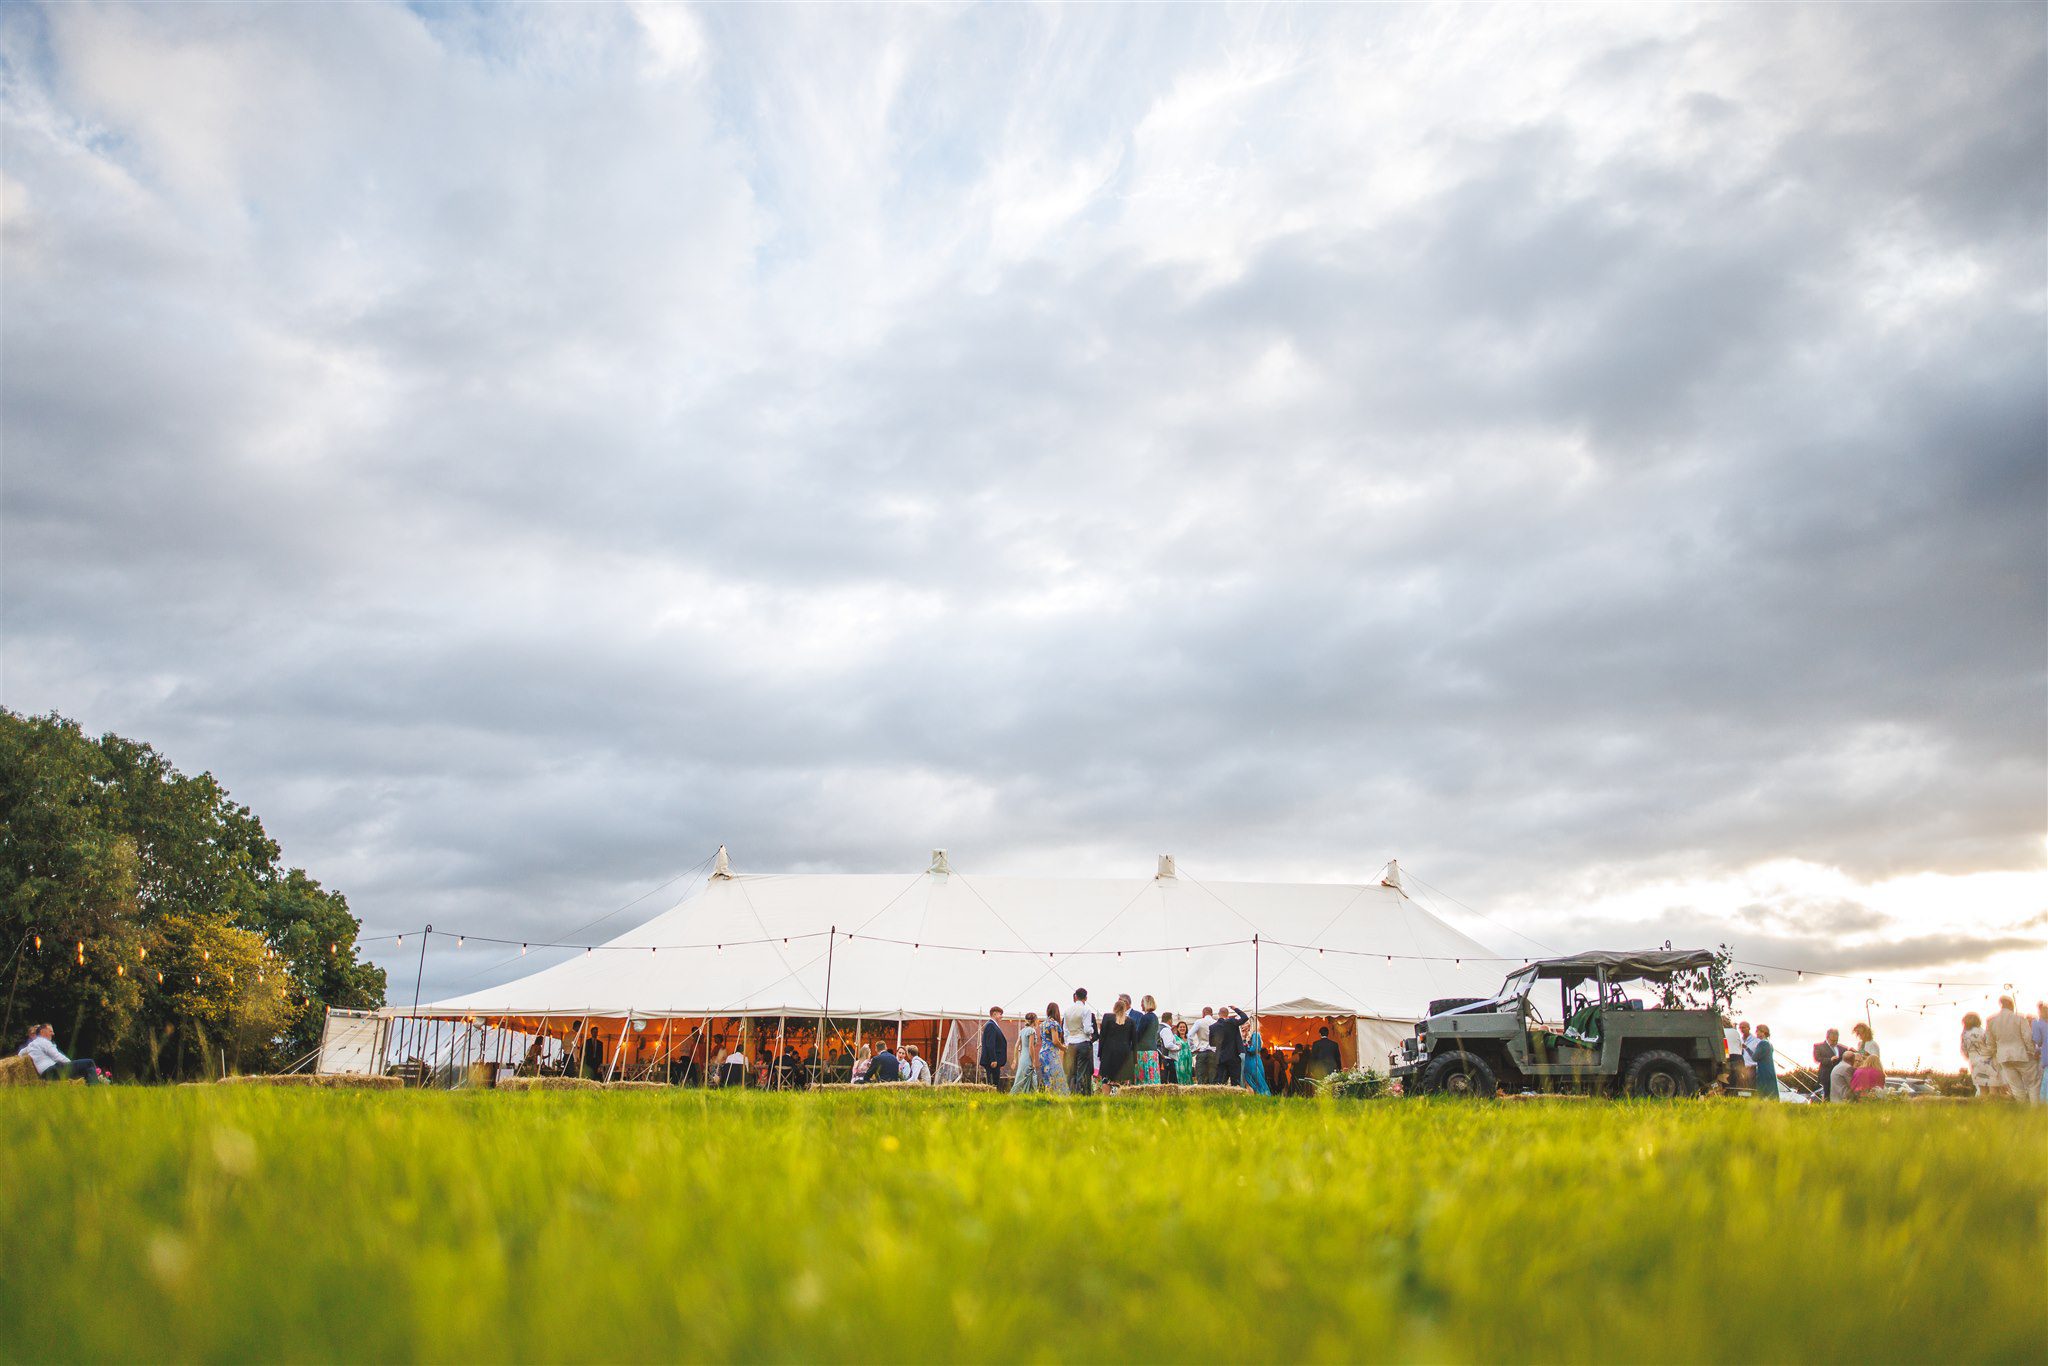 Marquee wedding photographer in Herefordshire